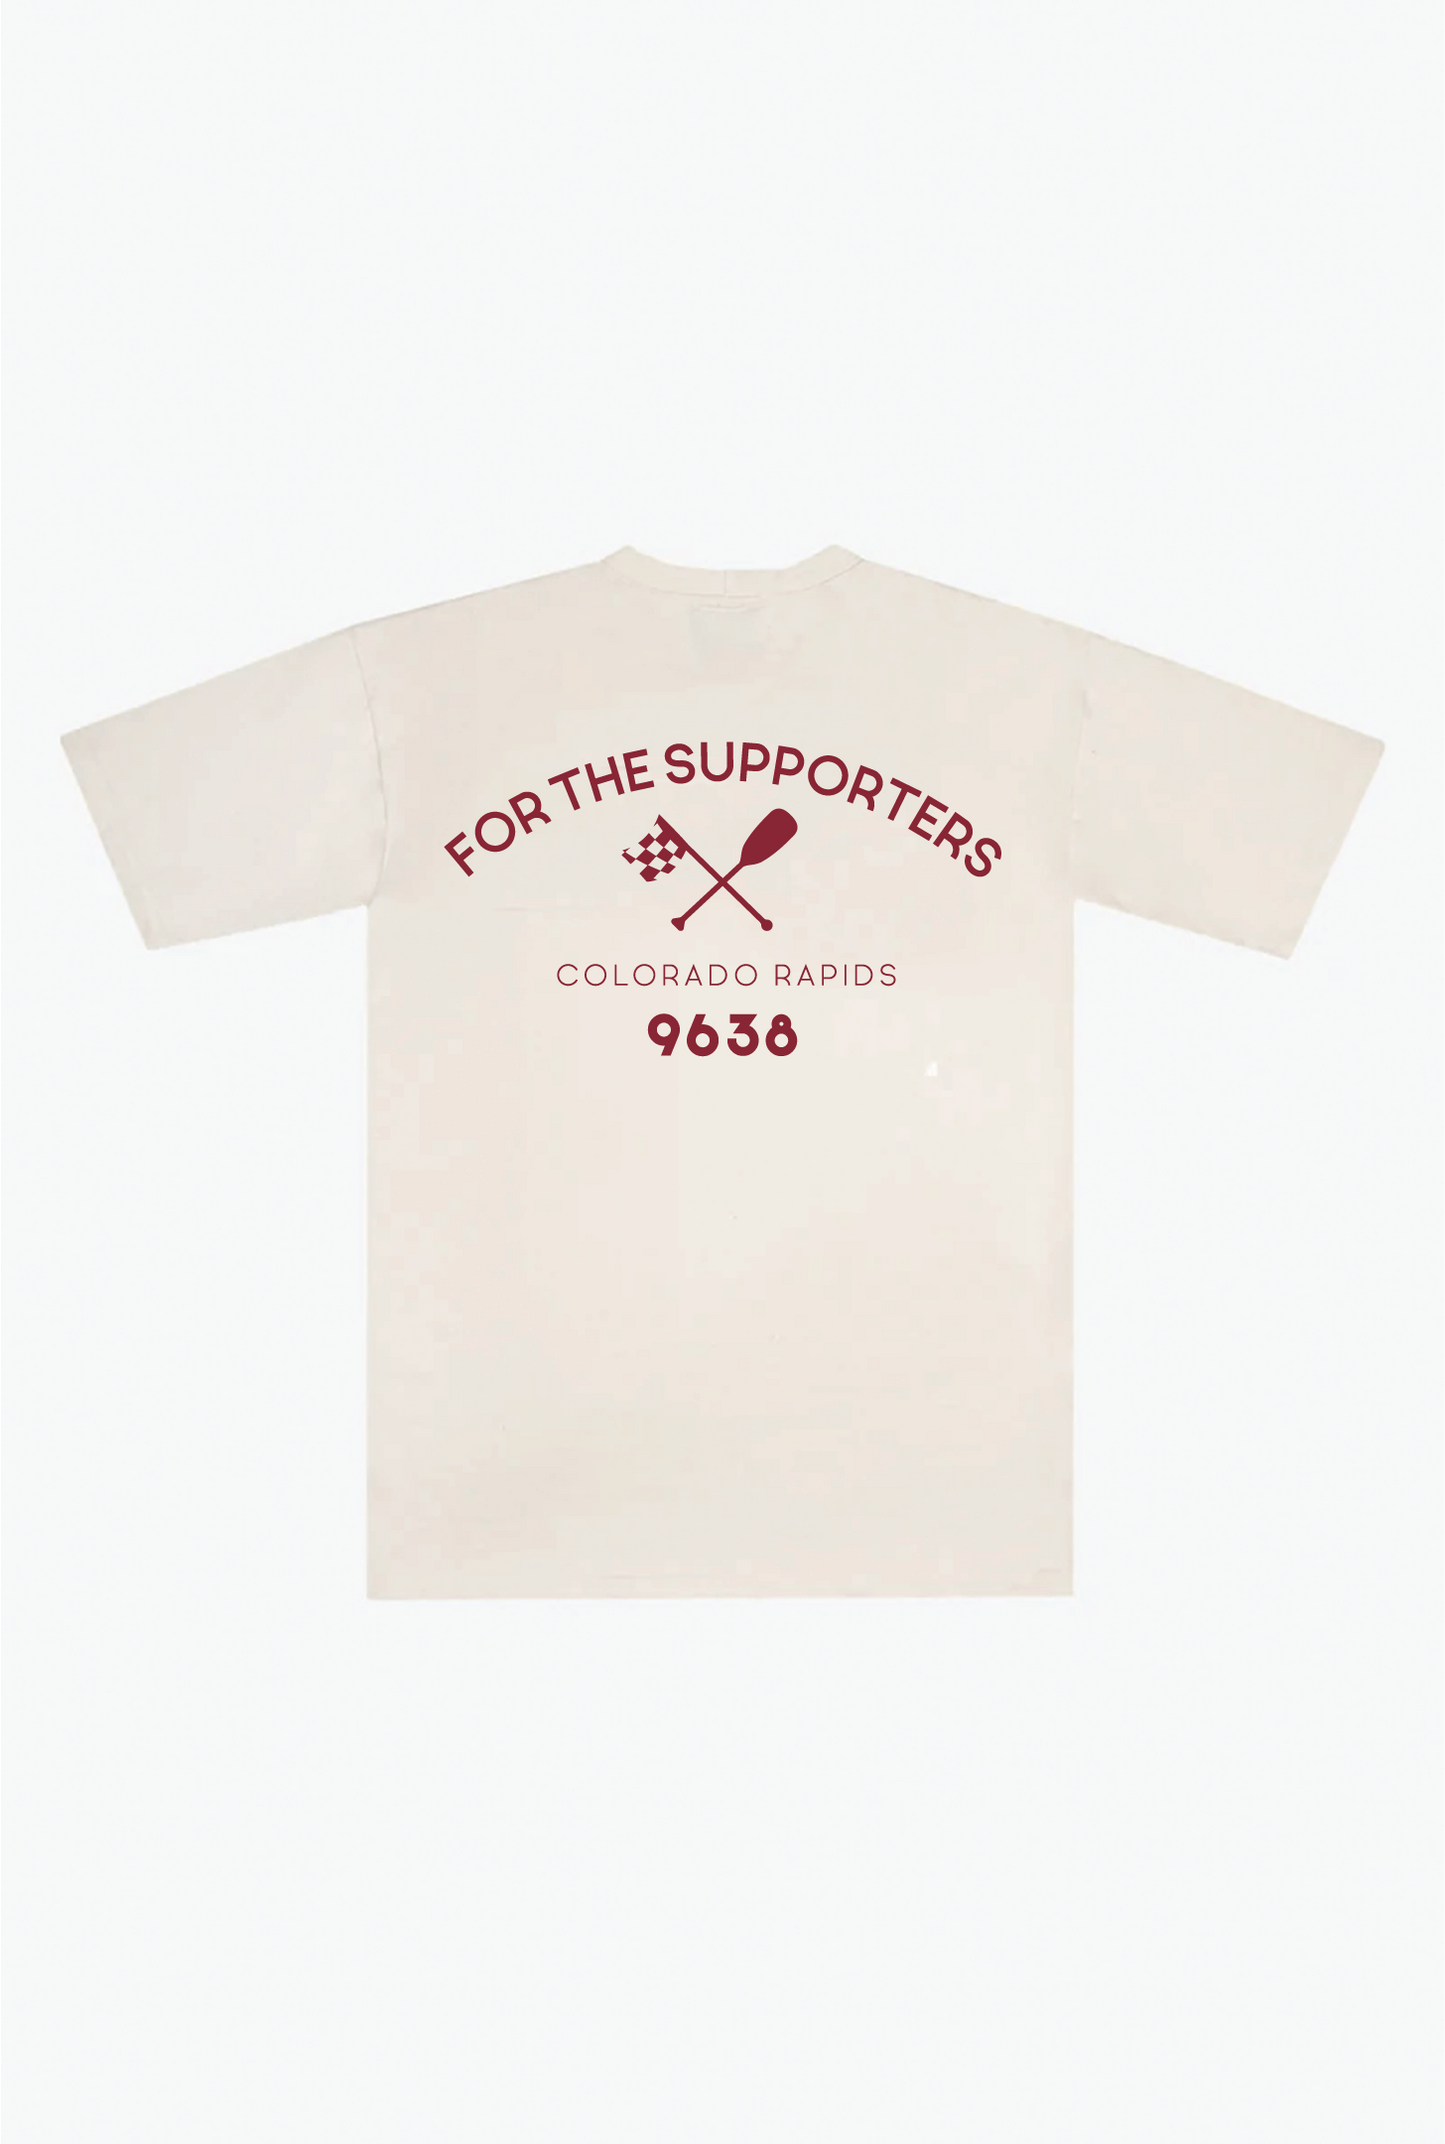 Back of ivory short sleeve with burgundy print "FOR THE SUPPORTERS, COLORADO RAPIDS 9638"